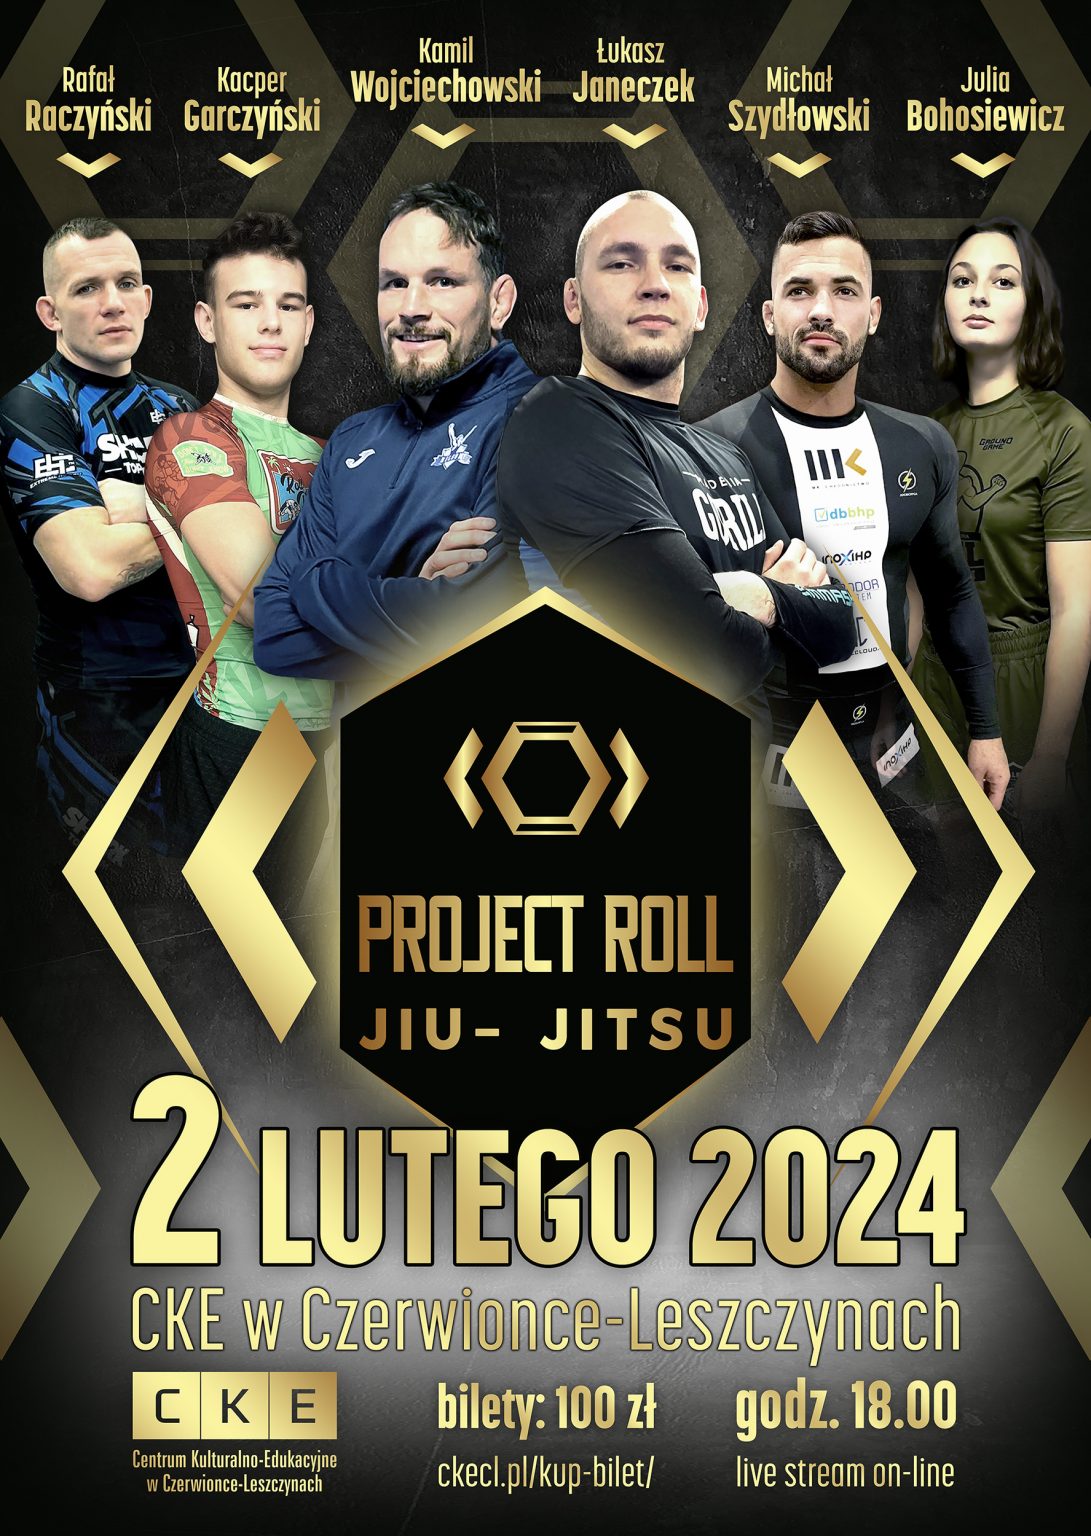 project roll